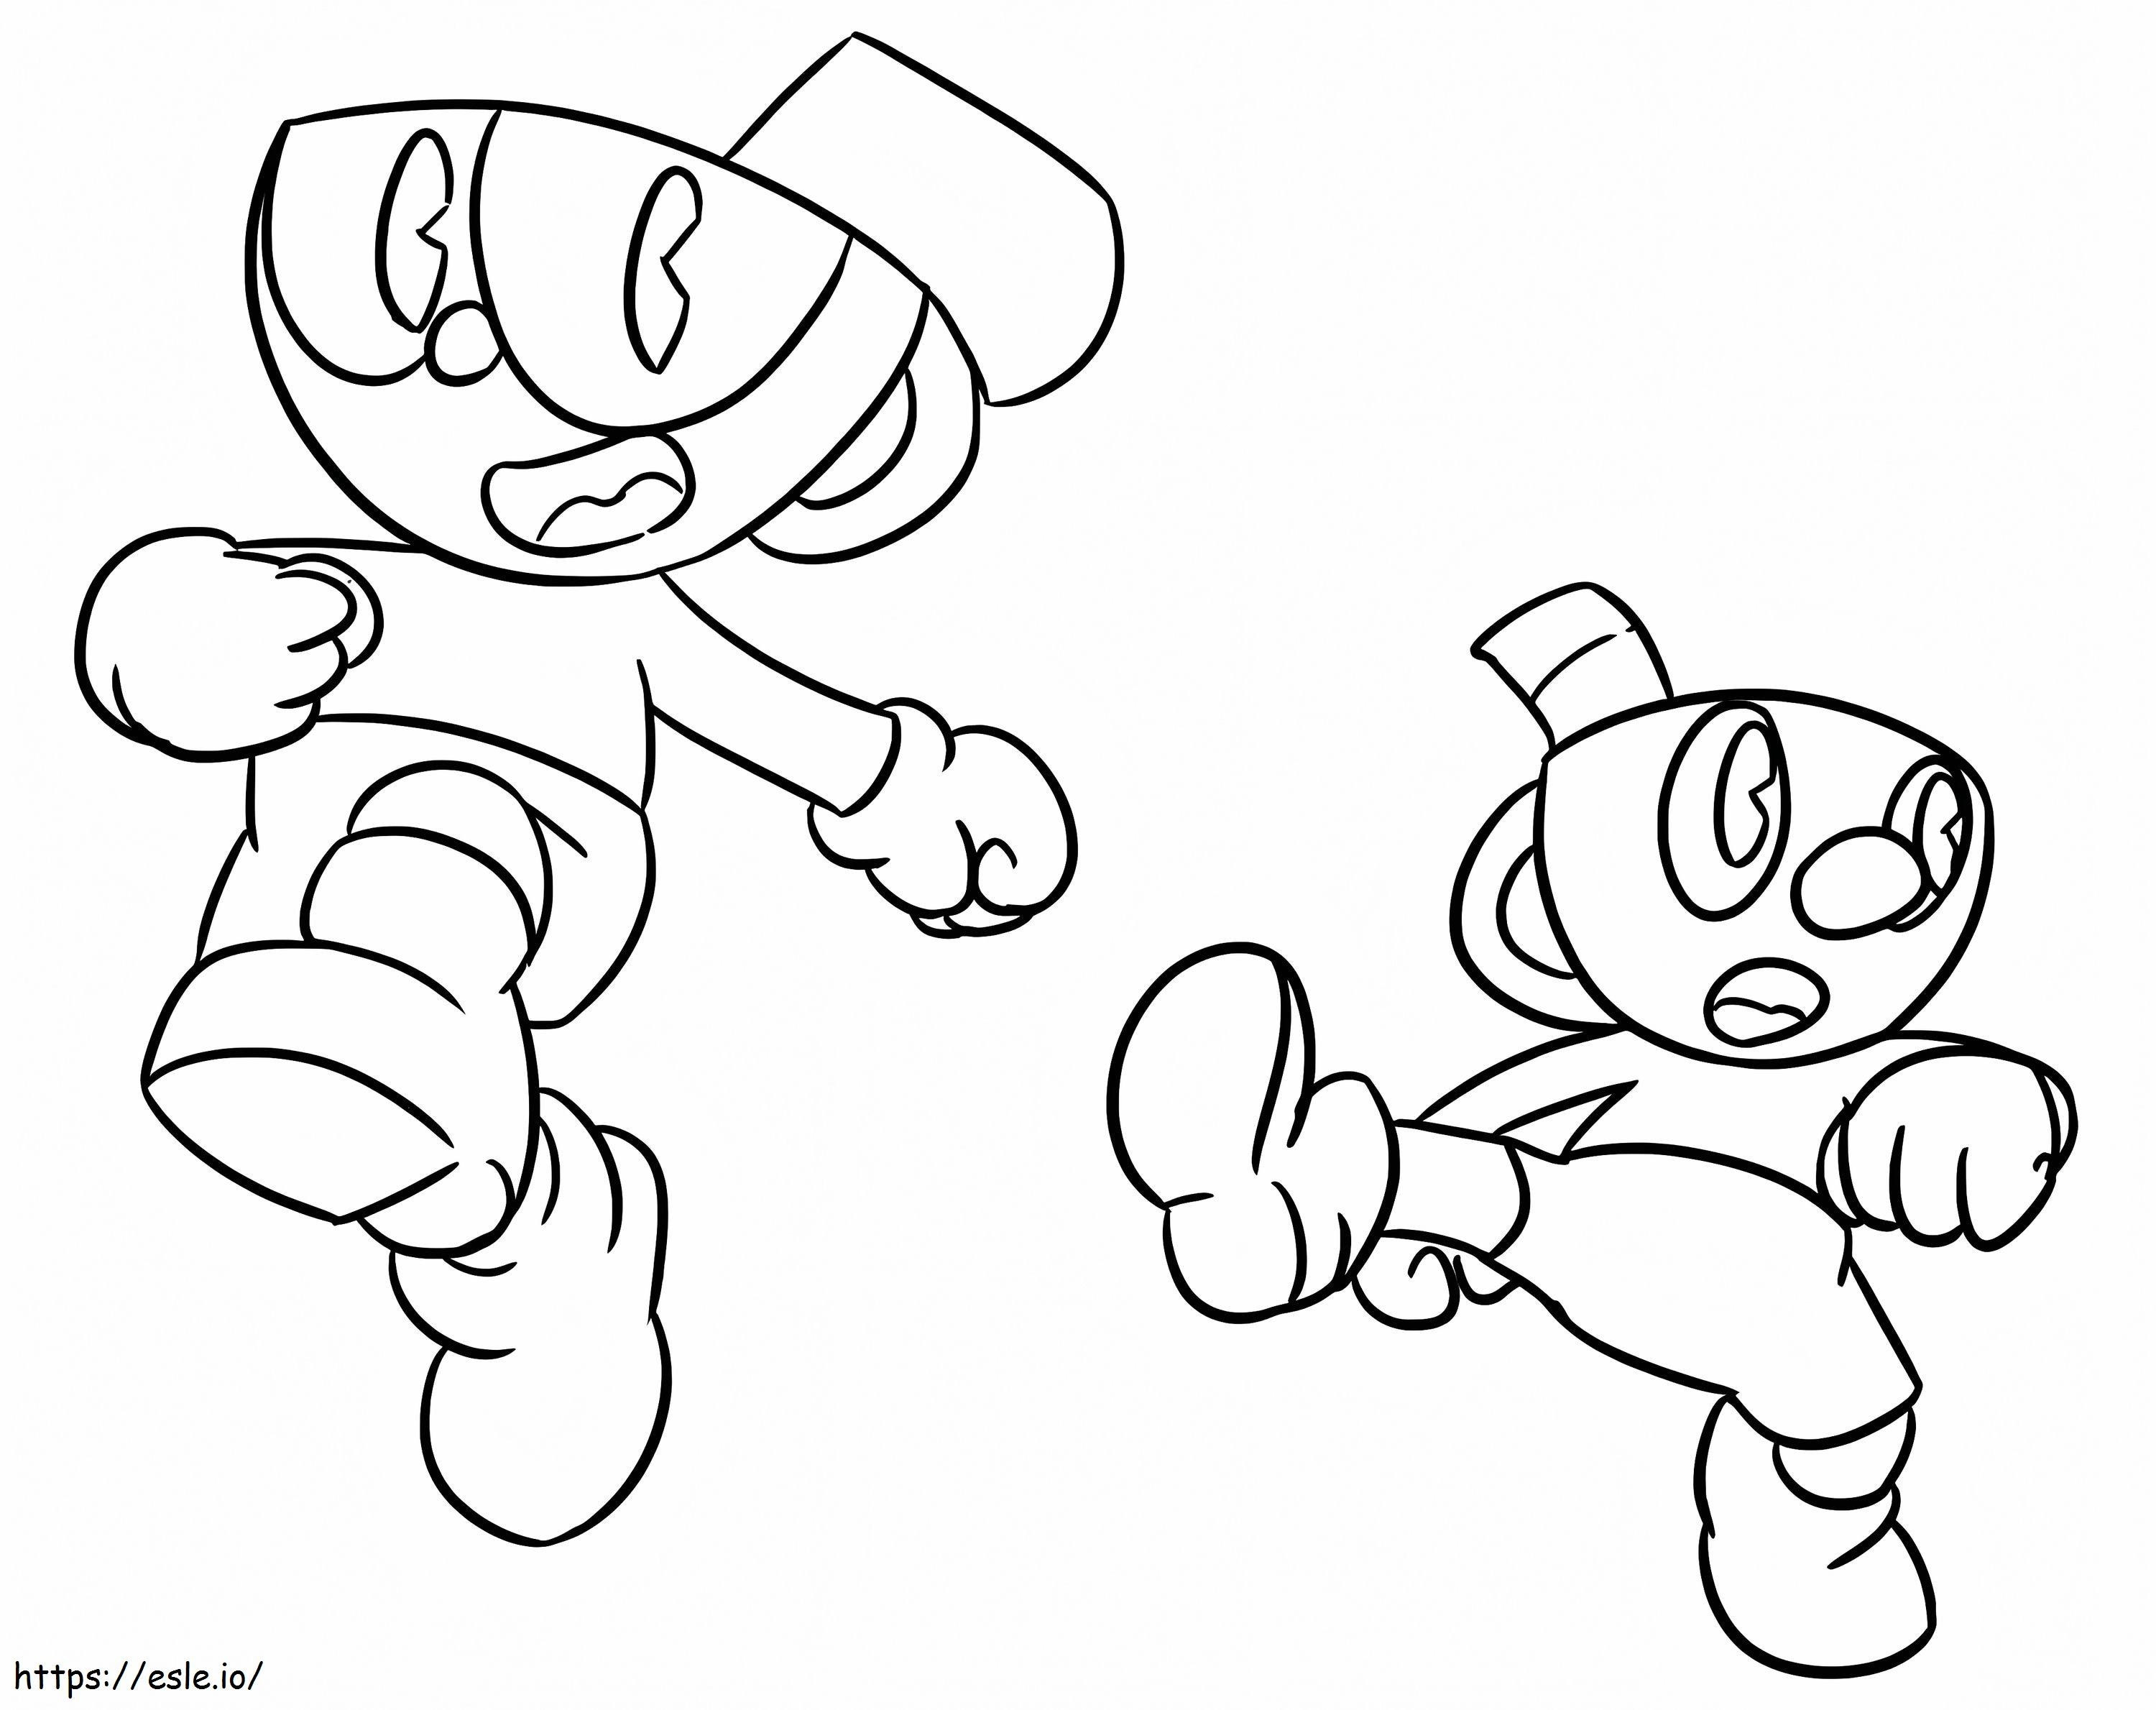 Cuphead 3 coloring page